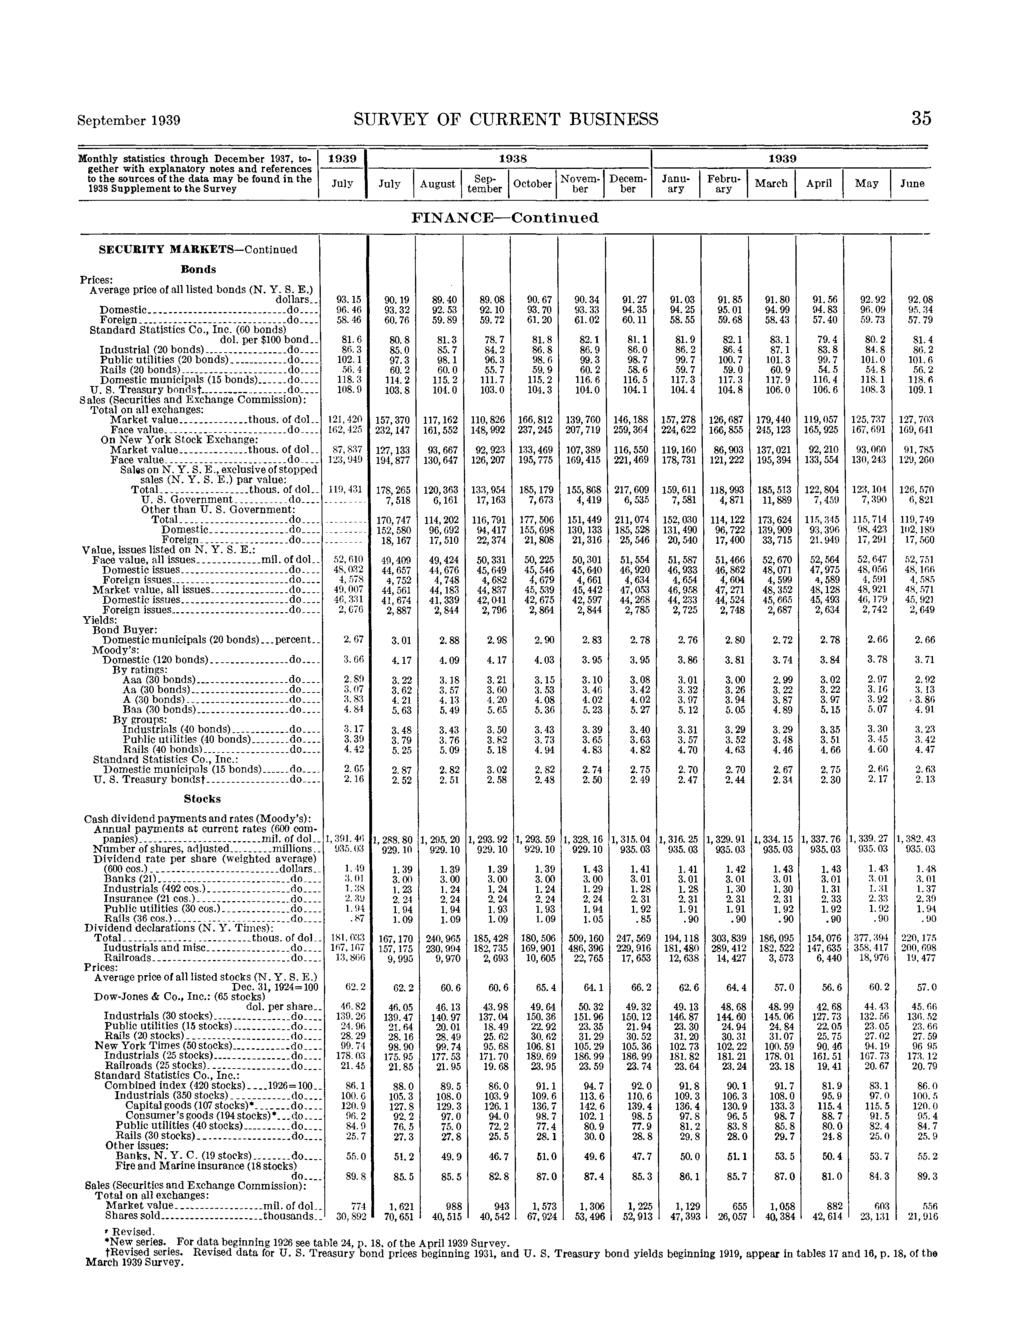 SUEVEY OF CURRENT BUSINESS 35 Monthly statistics through 1937, together Supplement to the Survey SECURITY MARKETS-Continued Bonds Prices: Average price of all listed bonds (N. Y. S. E.) llars.